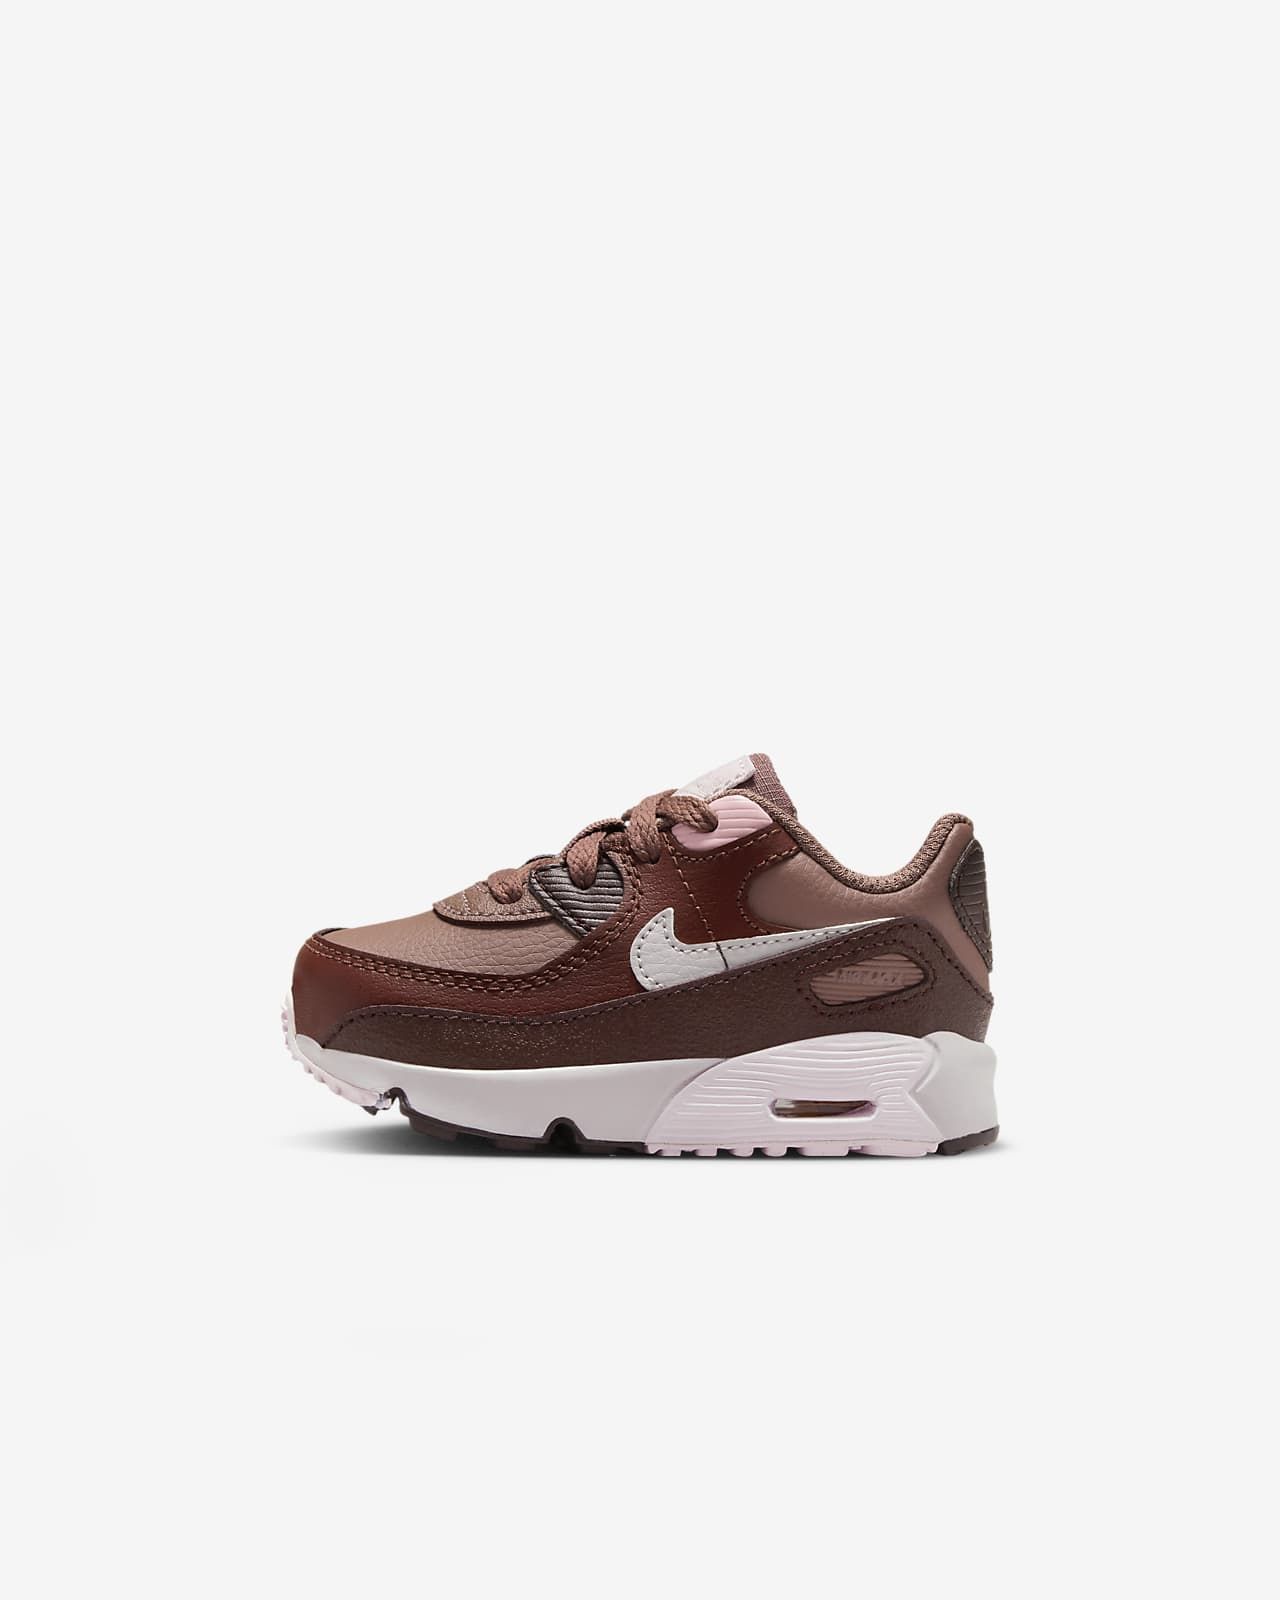 Nike Air Max 90 LTR Baby/Toddler Shoes. Nike.com | Nike (US)